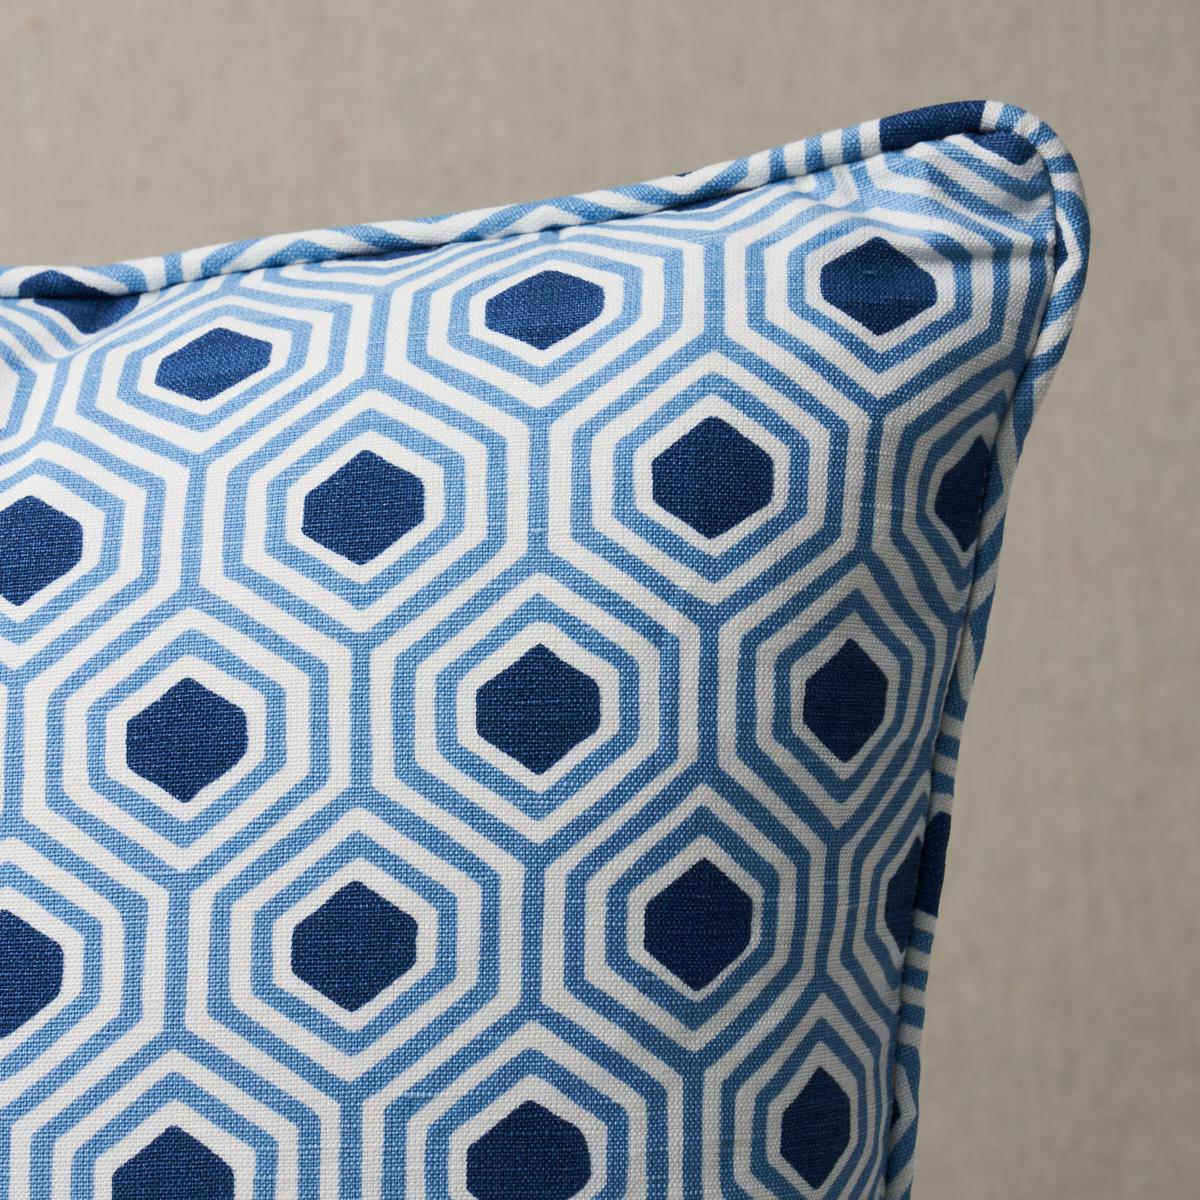 This pillow features Otis Hand Print with a self welt finish. Otis in blue is a fun and cheerful geometric fabric that sits on the groovier side of preppy. Hand screen-printed in India on a cotton-linen ground, this design is full of handmade marks